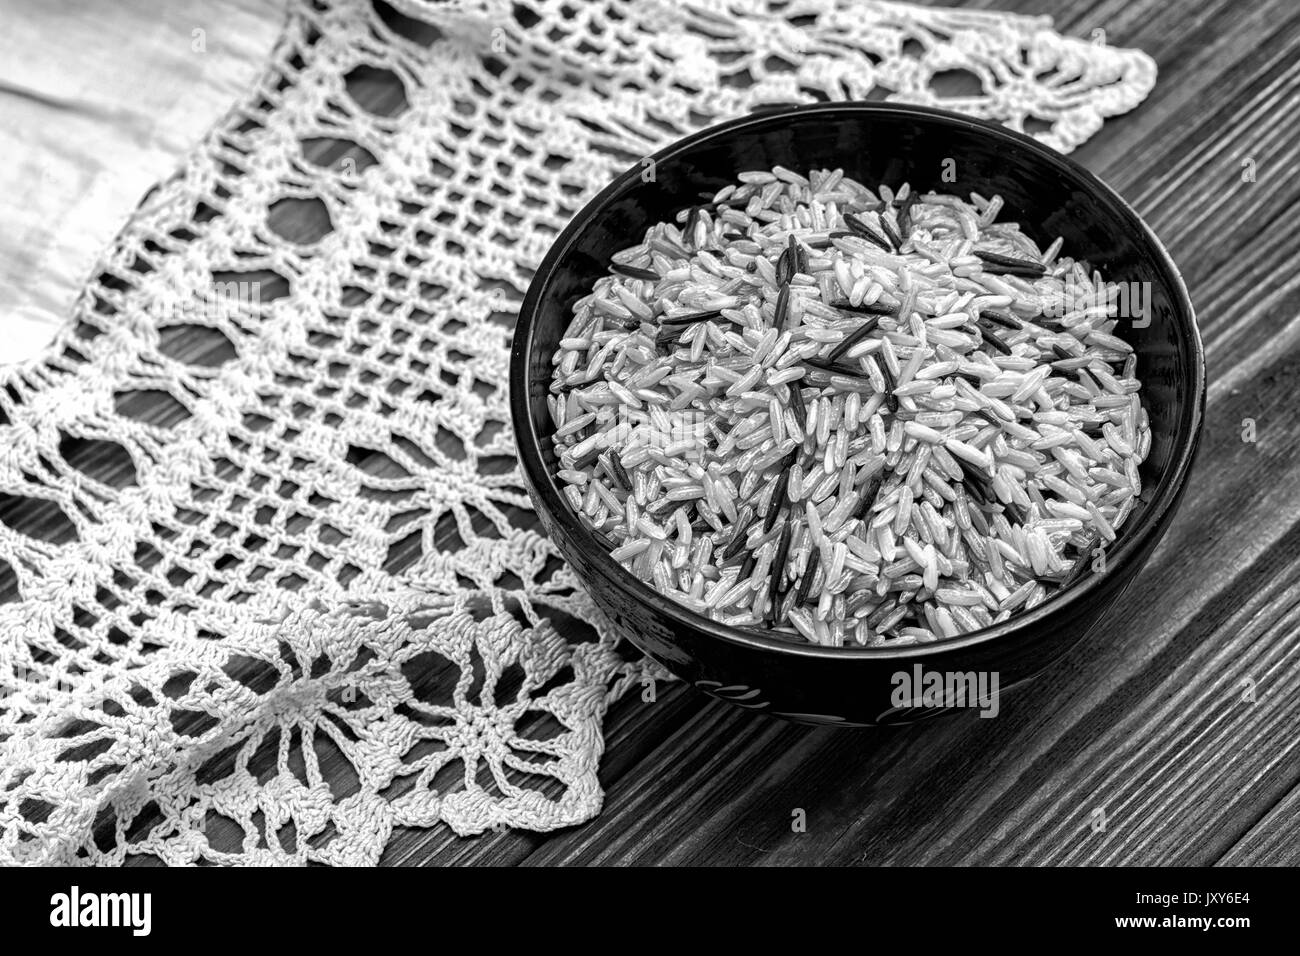 Unpolished brown and black rice in wooden bowl on wooden background with rustic doily crochet. Top view. Black and white Stock Photo